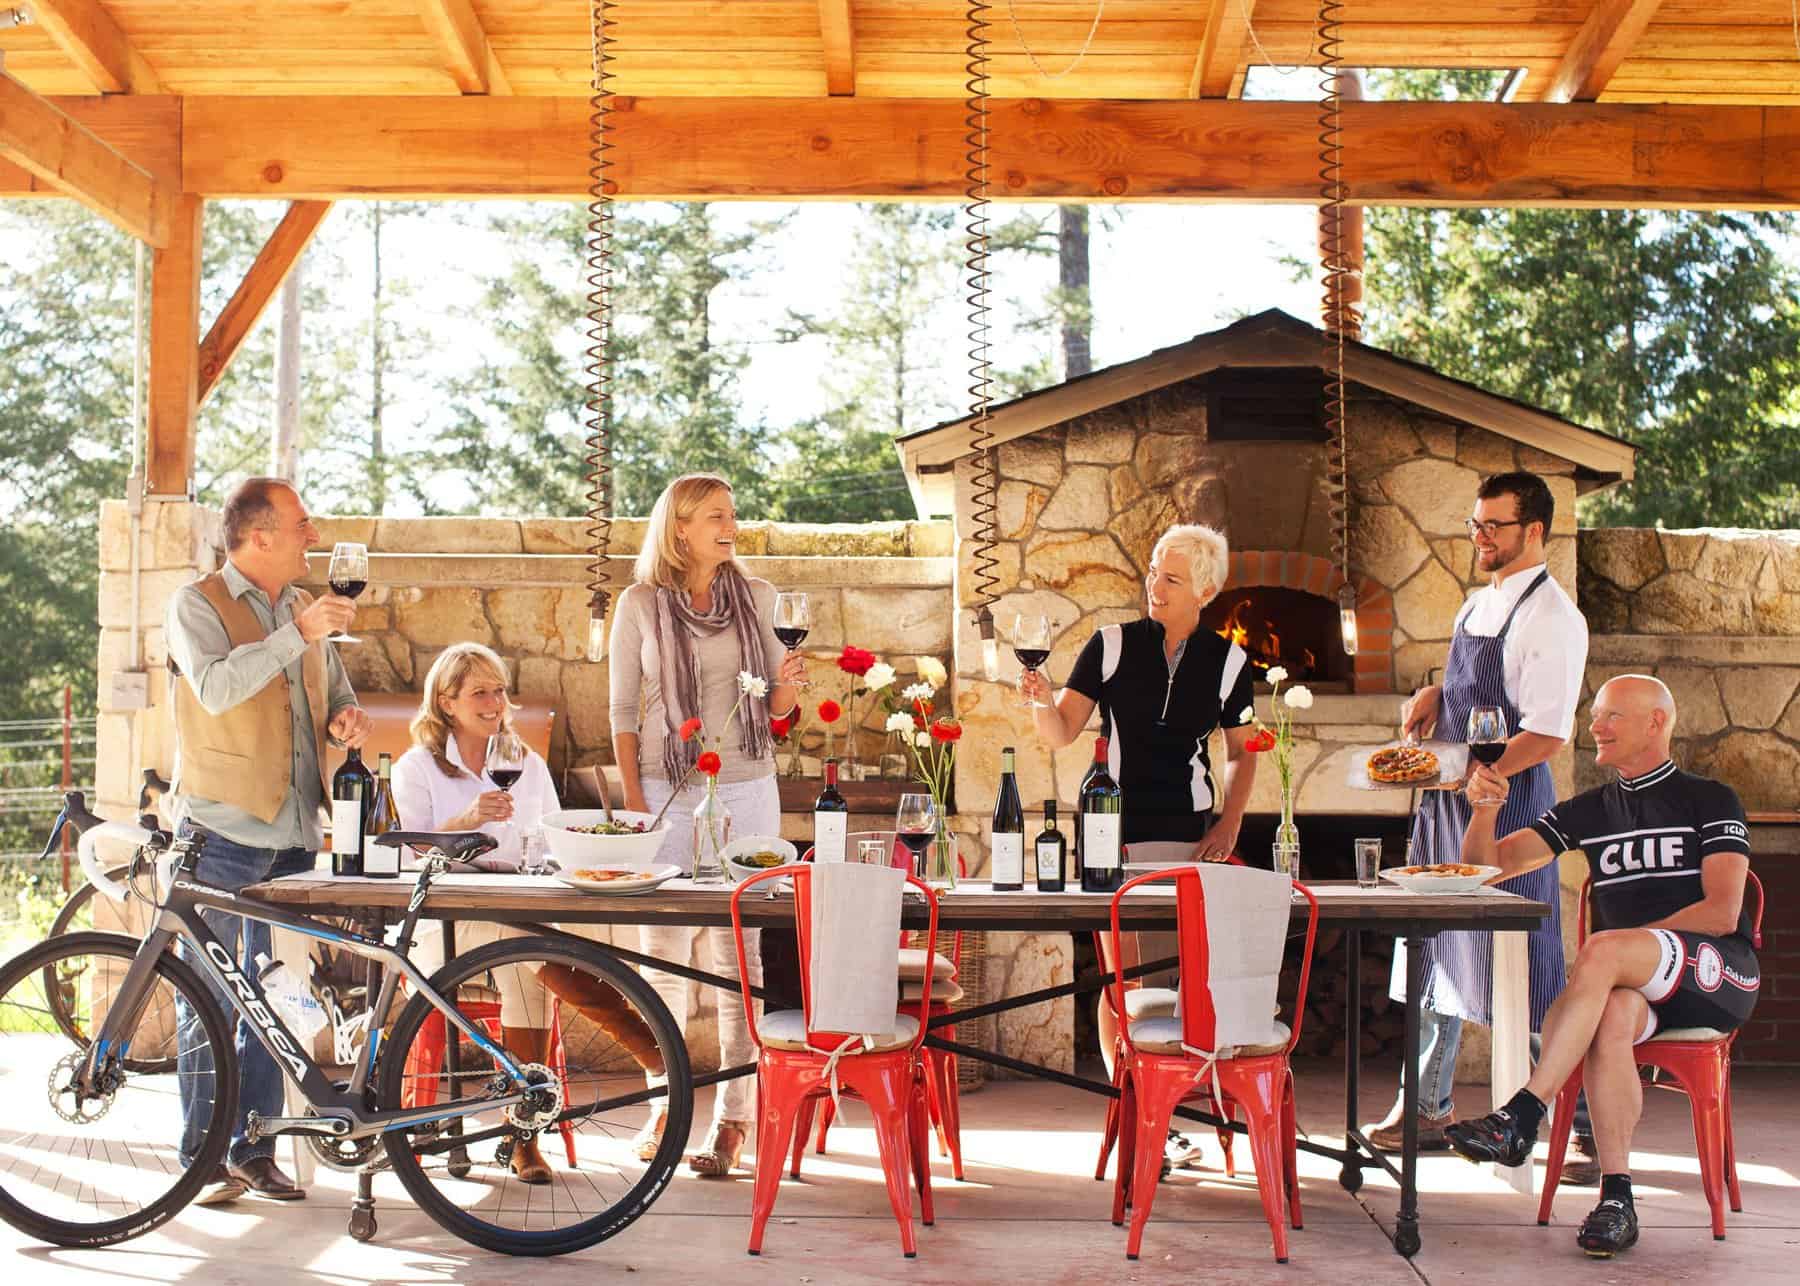 A group of people share a bottle of wine at a long, outdoor table at CLIF winery in Napa Valley.